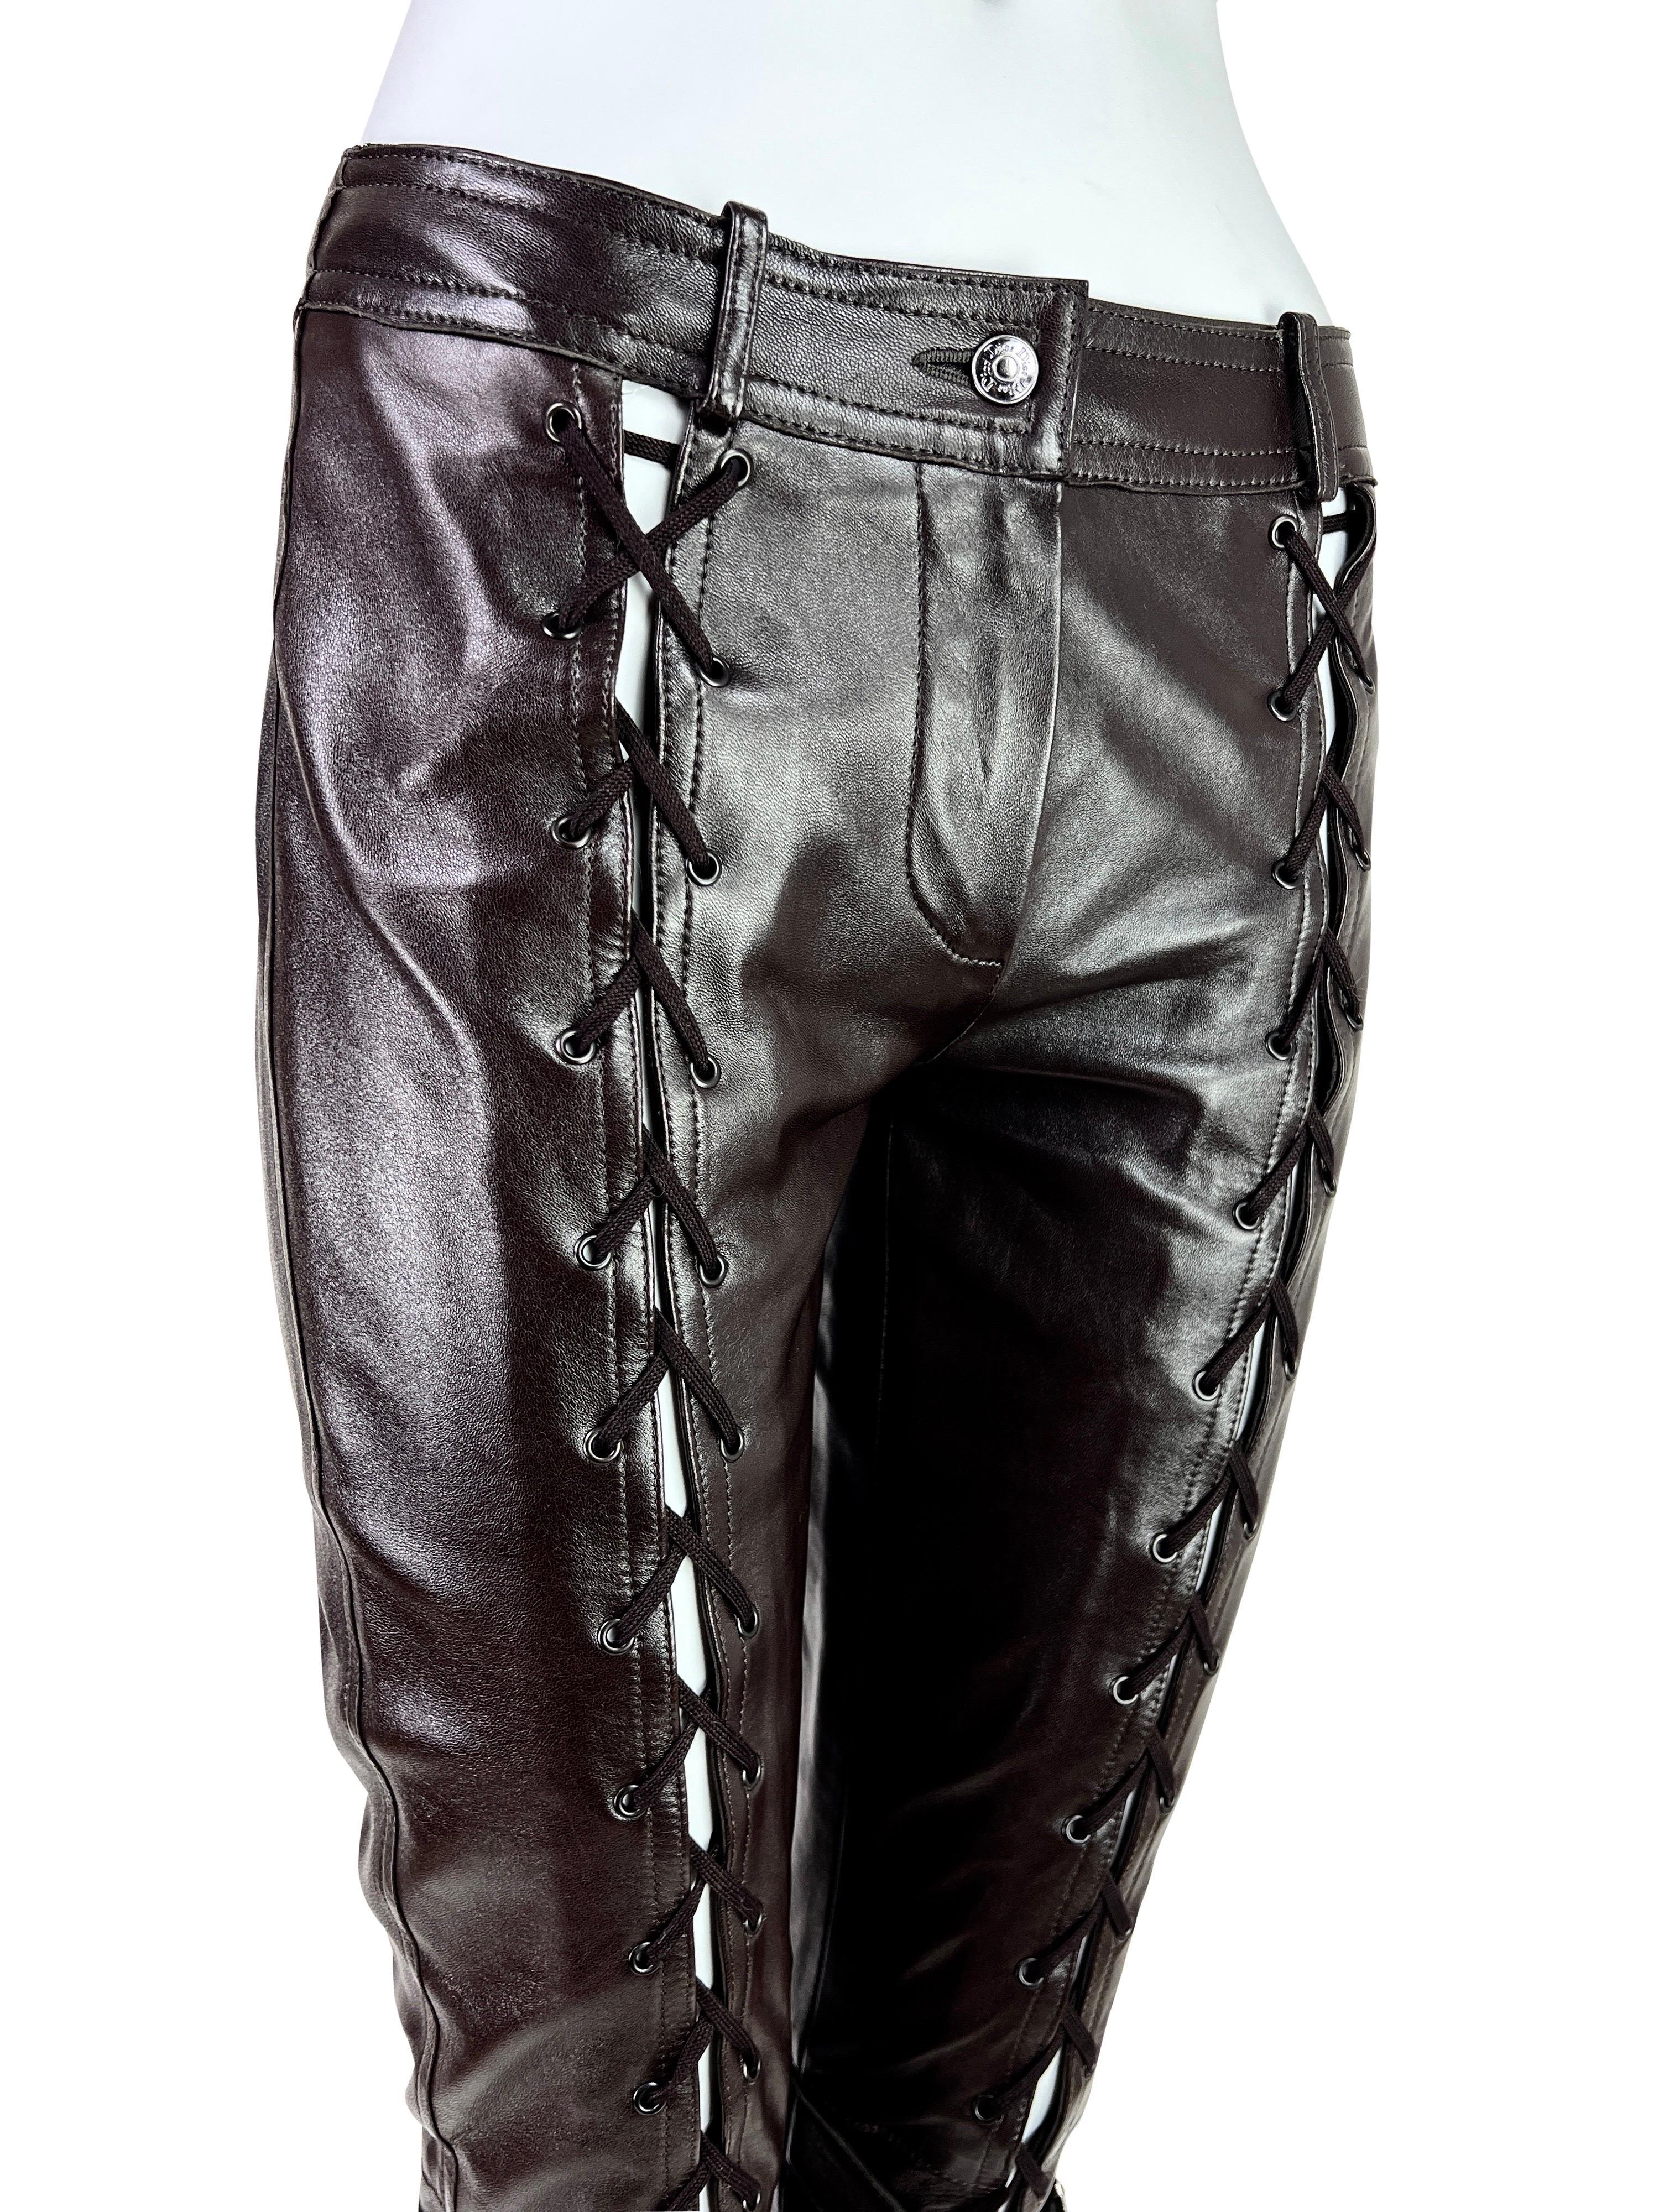 Dior by John Galliano Fall 2003 Leather Lace-Up Pants in Dark Chocolate For Sale 2